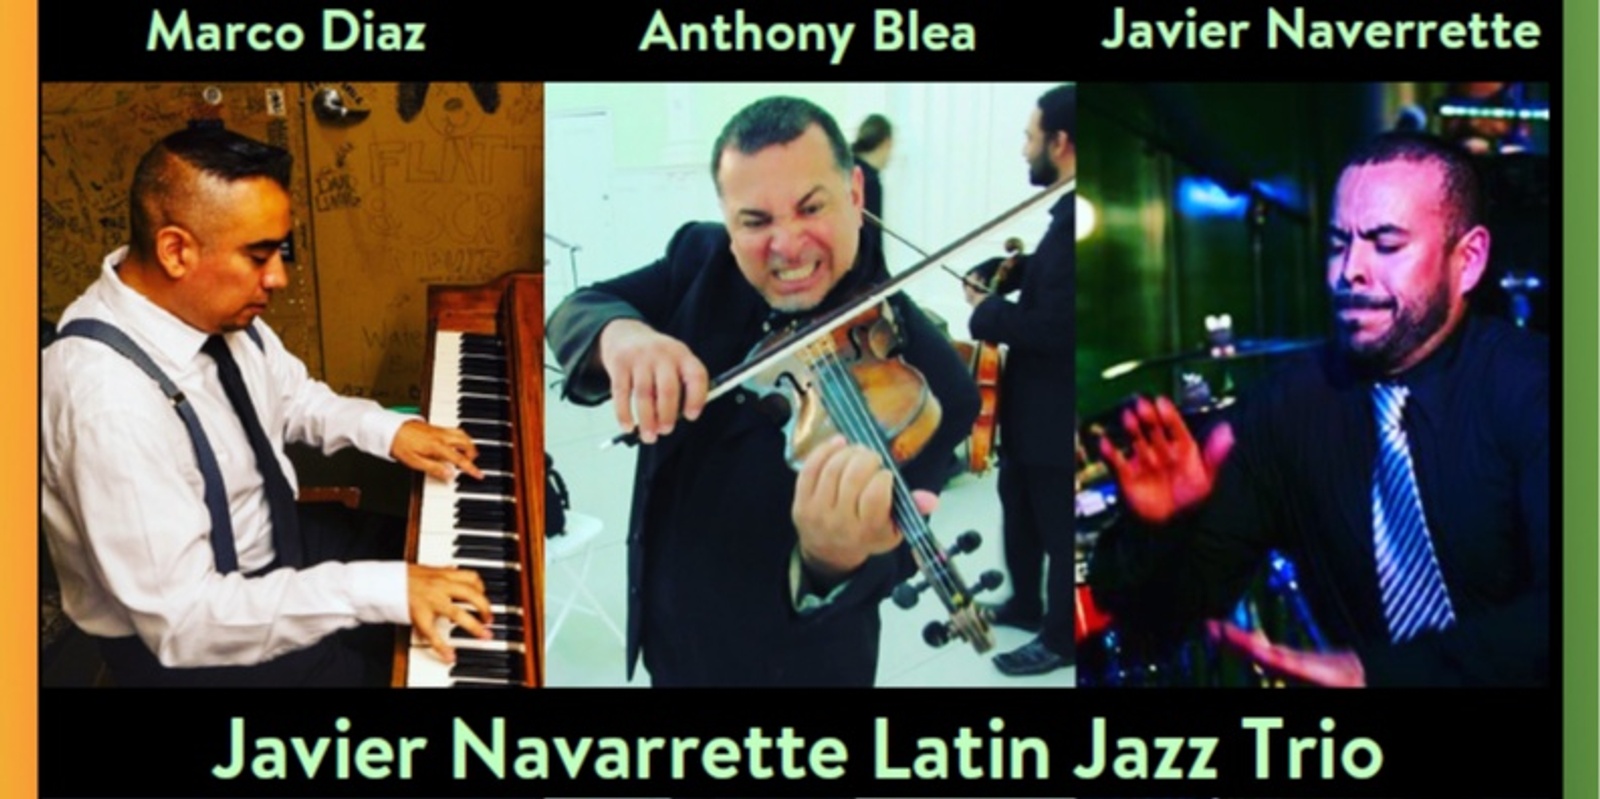 Banner image for The Javier Navarrette Latin Jazz Trio at The Annex Sessions, brought to you by SunJams and Javier Navarrette